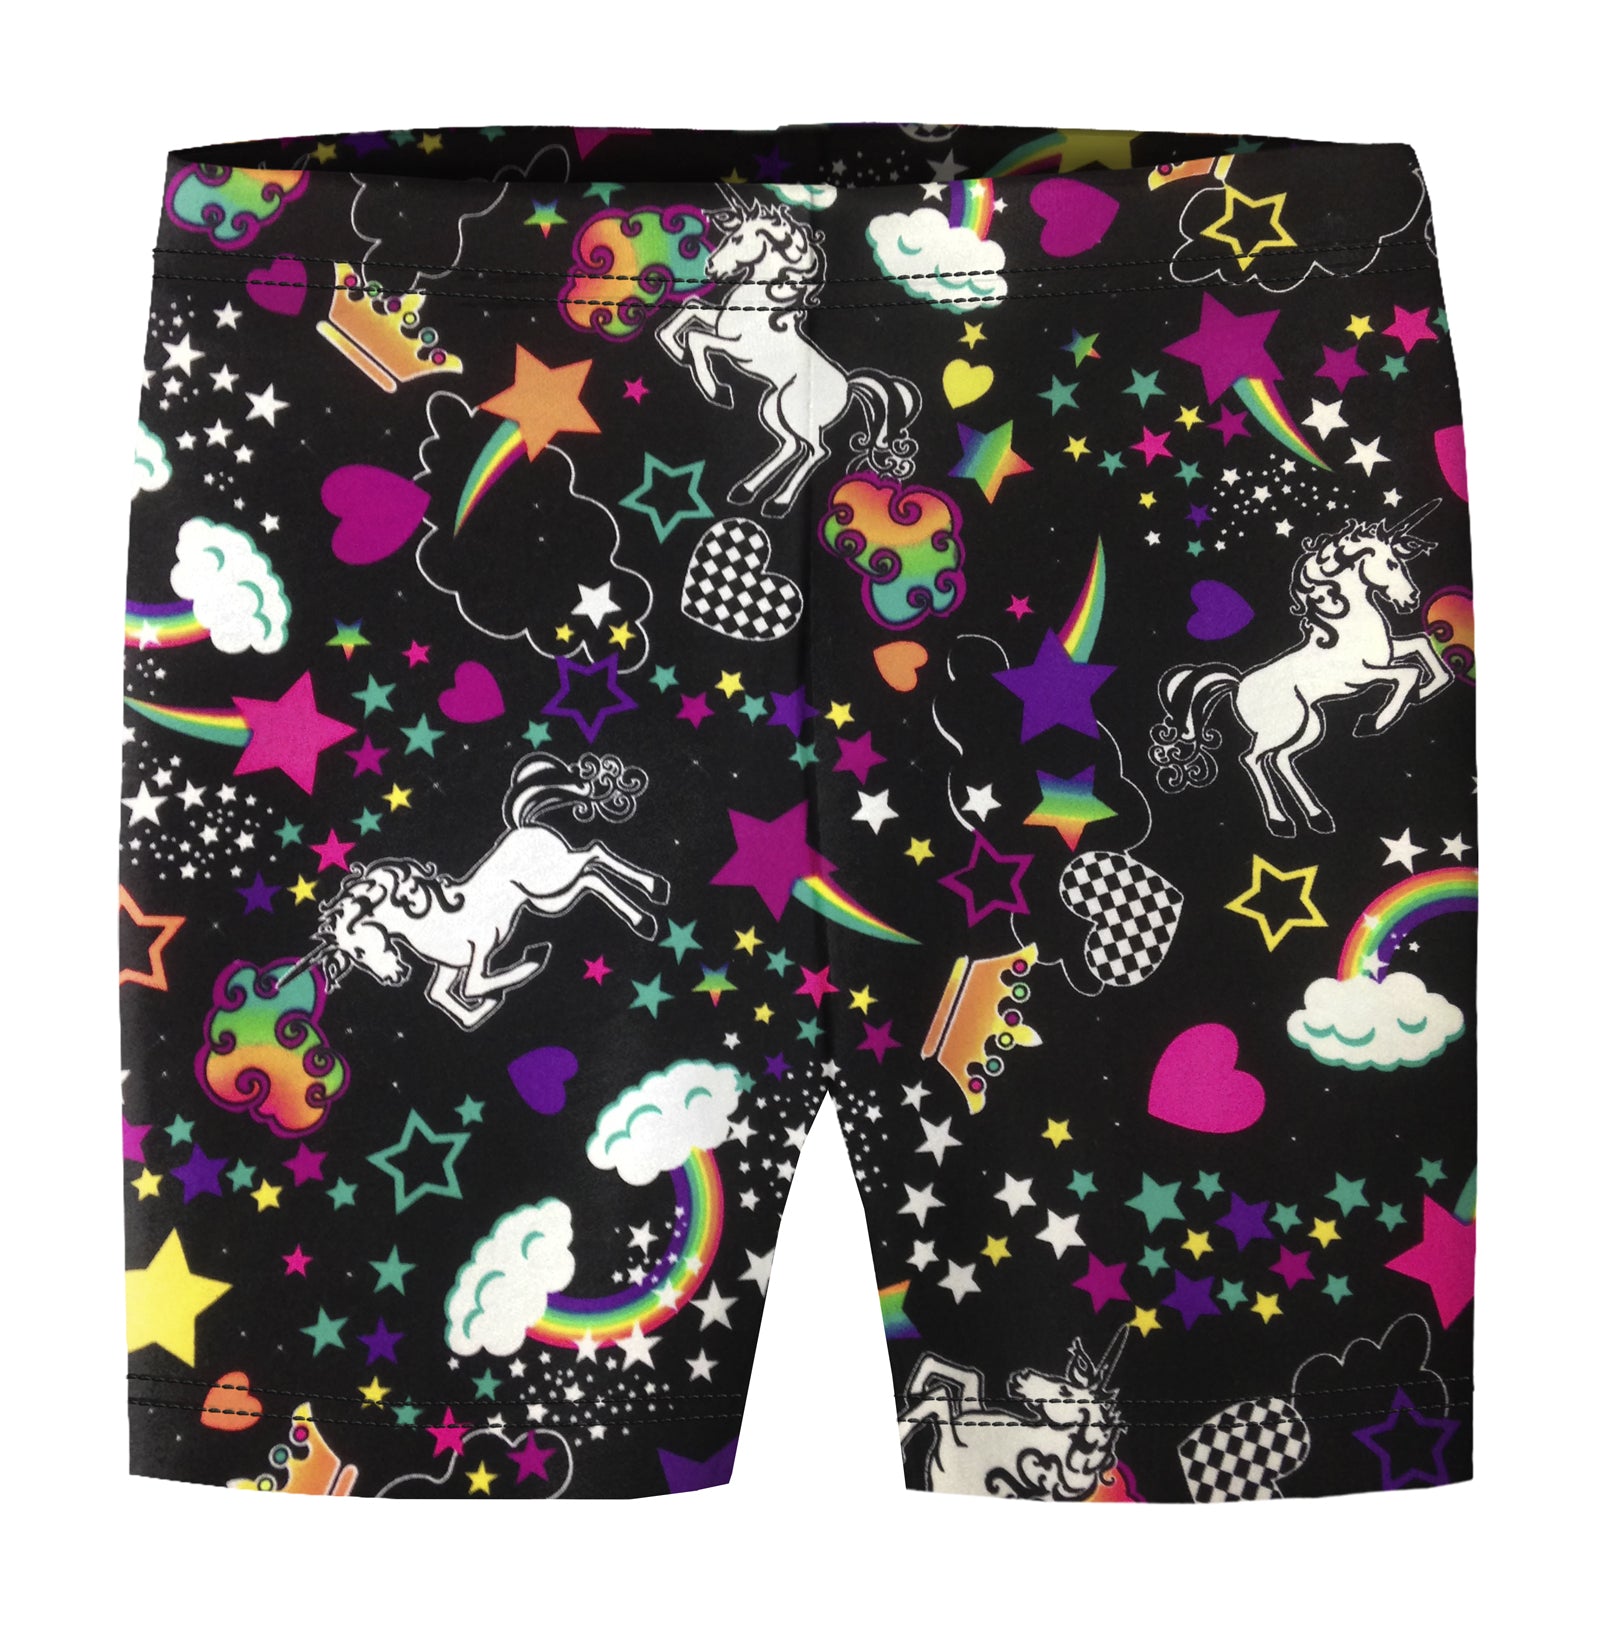 Sparkle Farms Girls Bloomer Shorts Review and Giveaway - Coolestmommy's  Coolest Thoughts